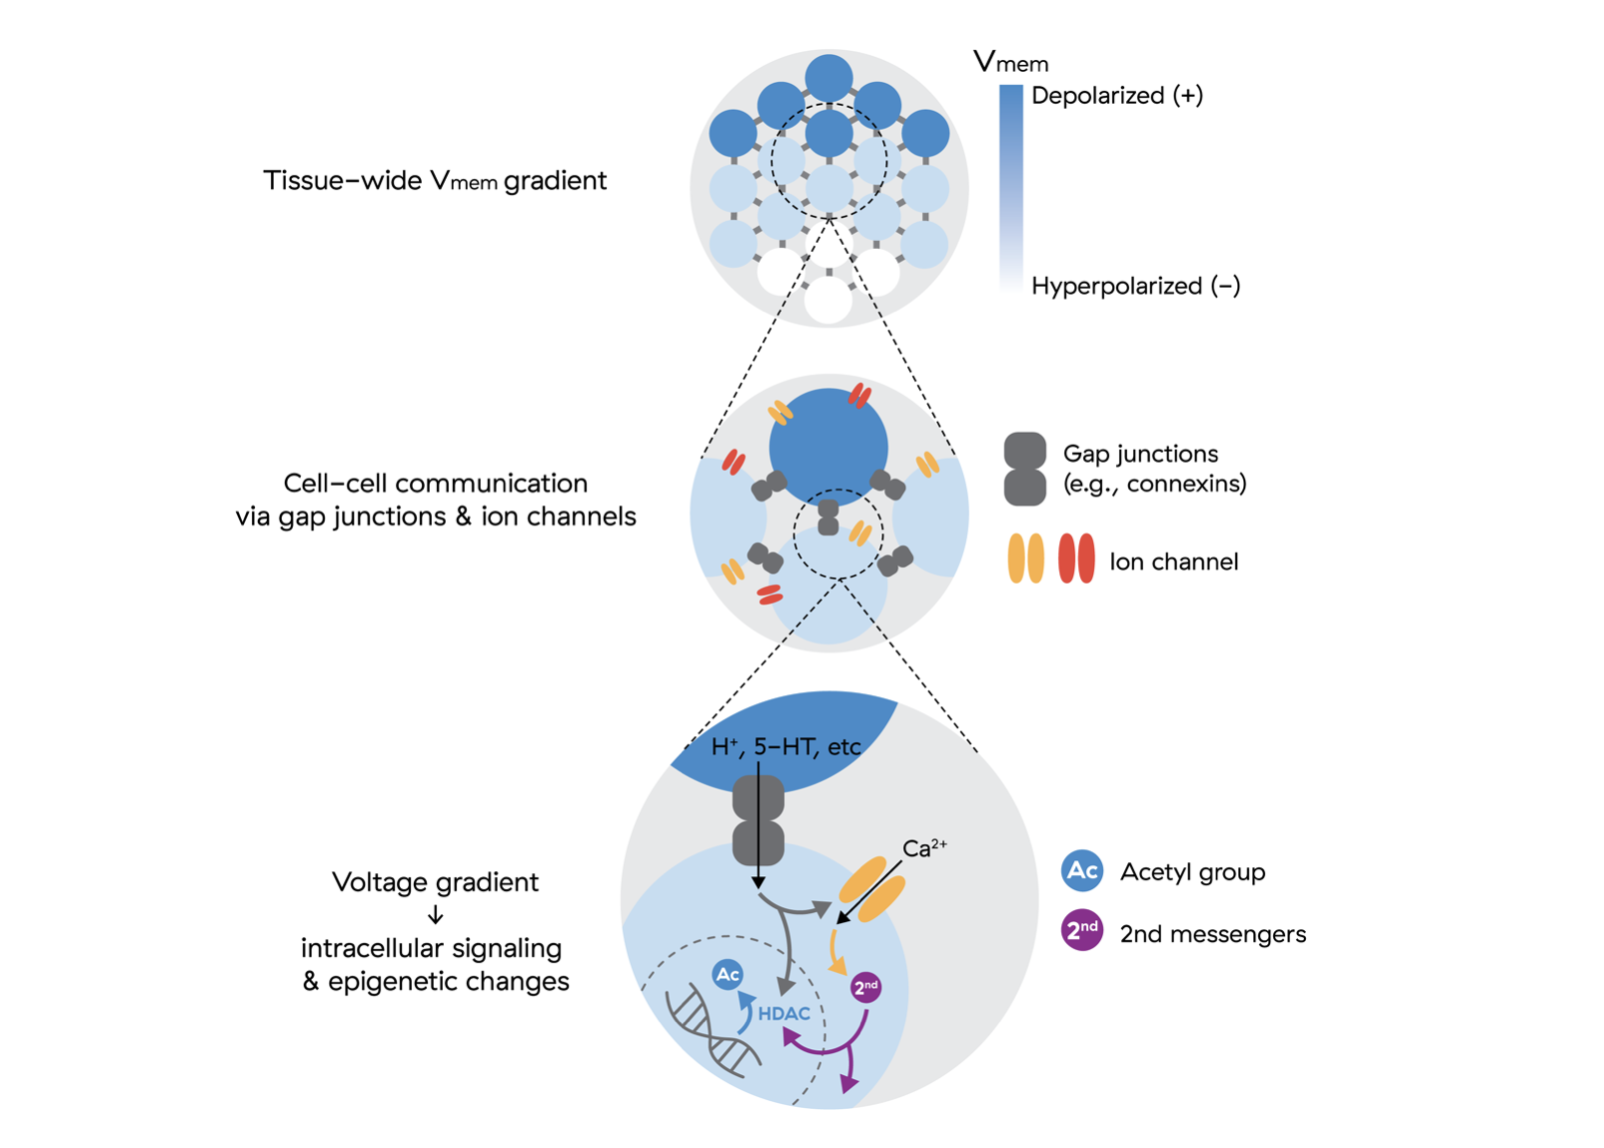 Image of bioelectric interventions influencing downstream transcriptional responses.